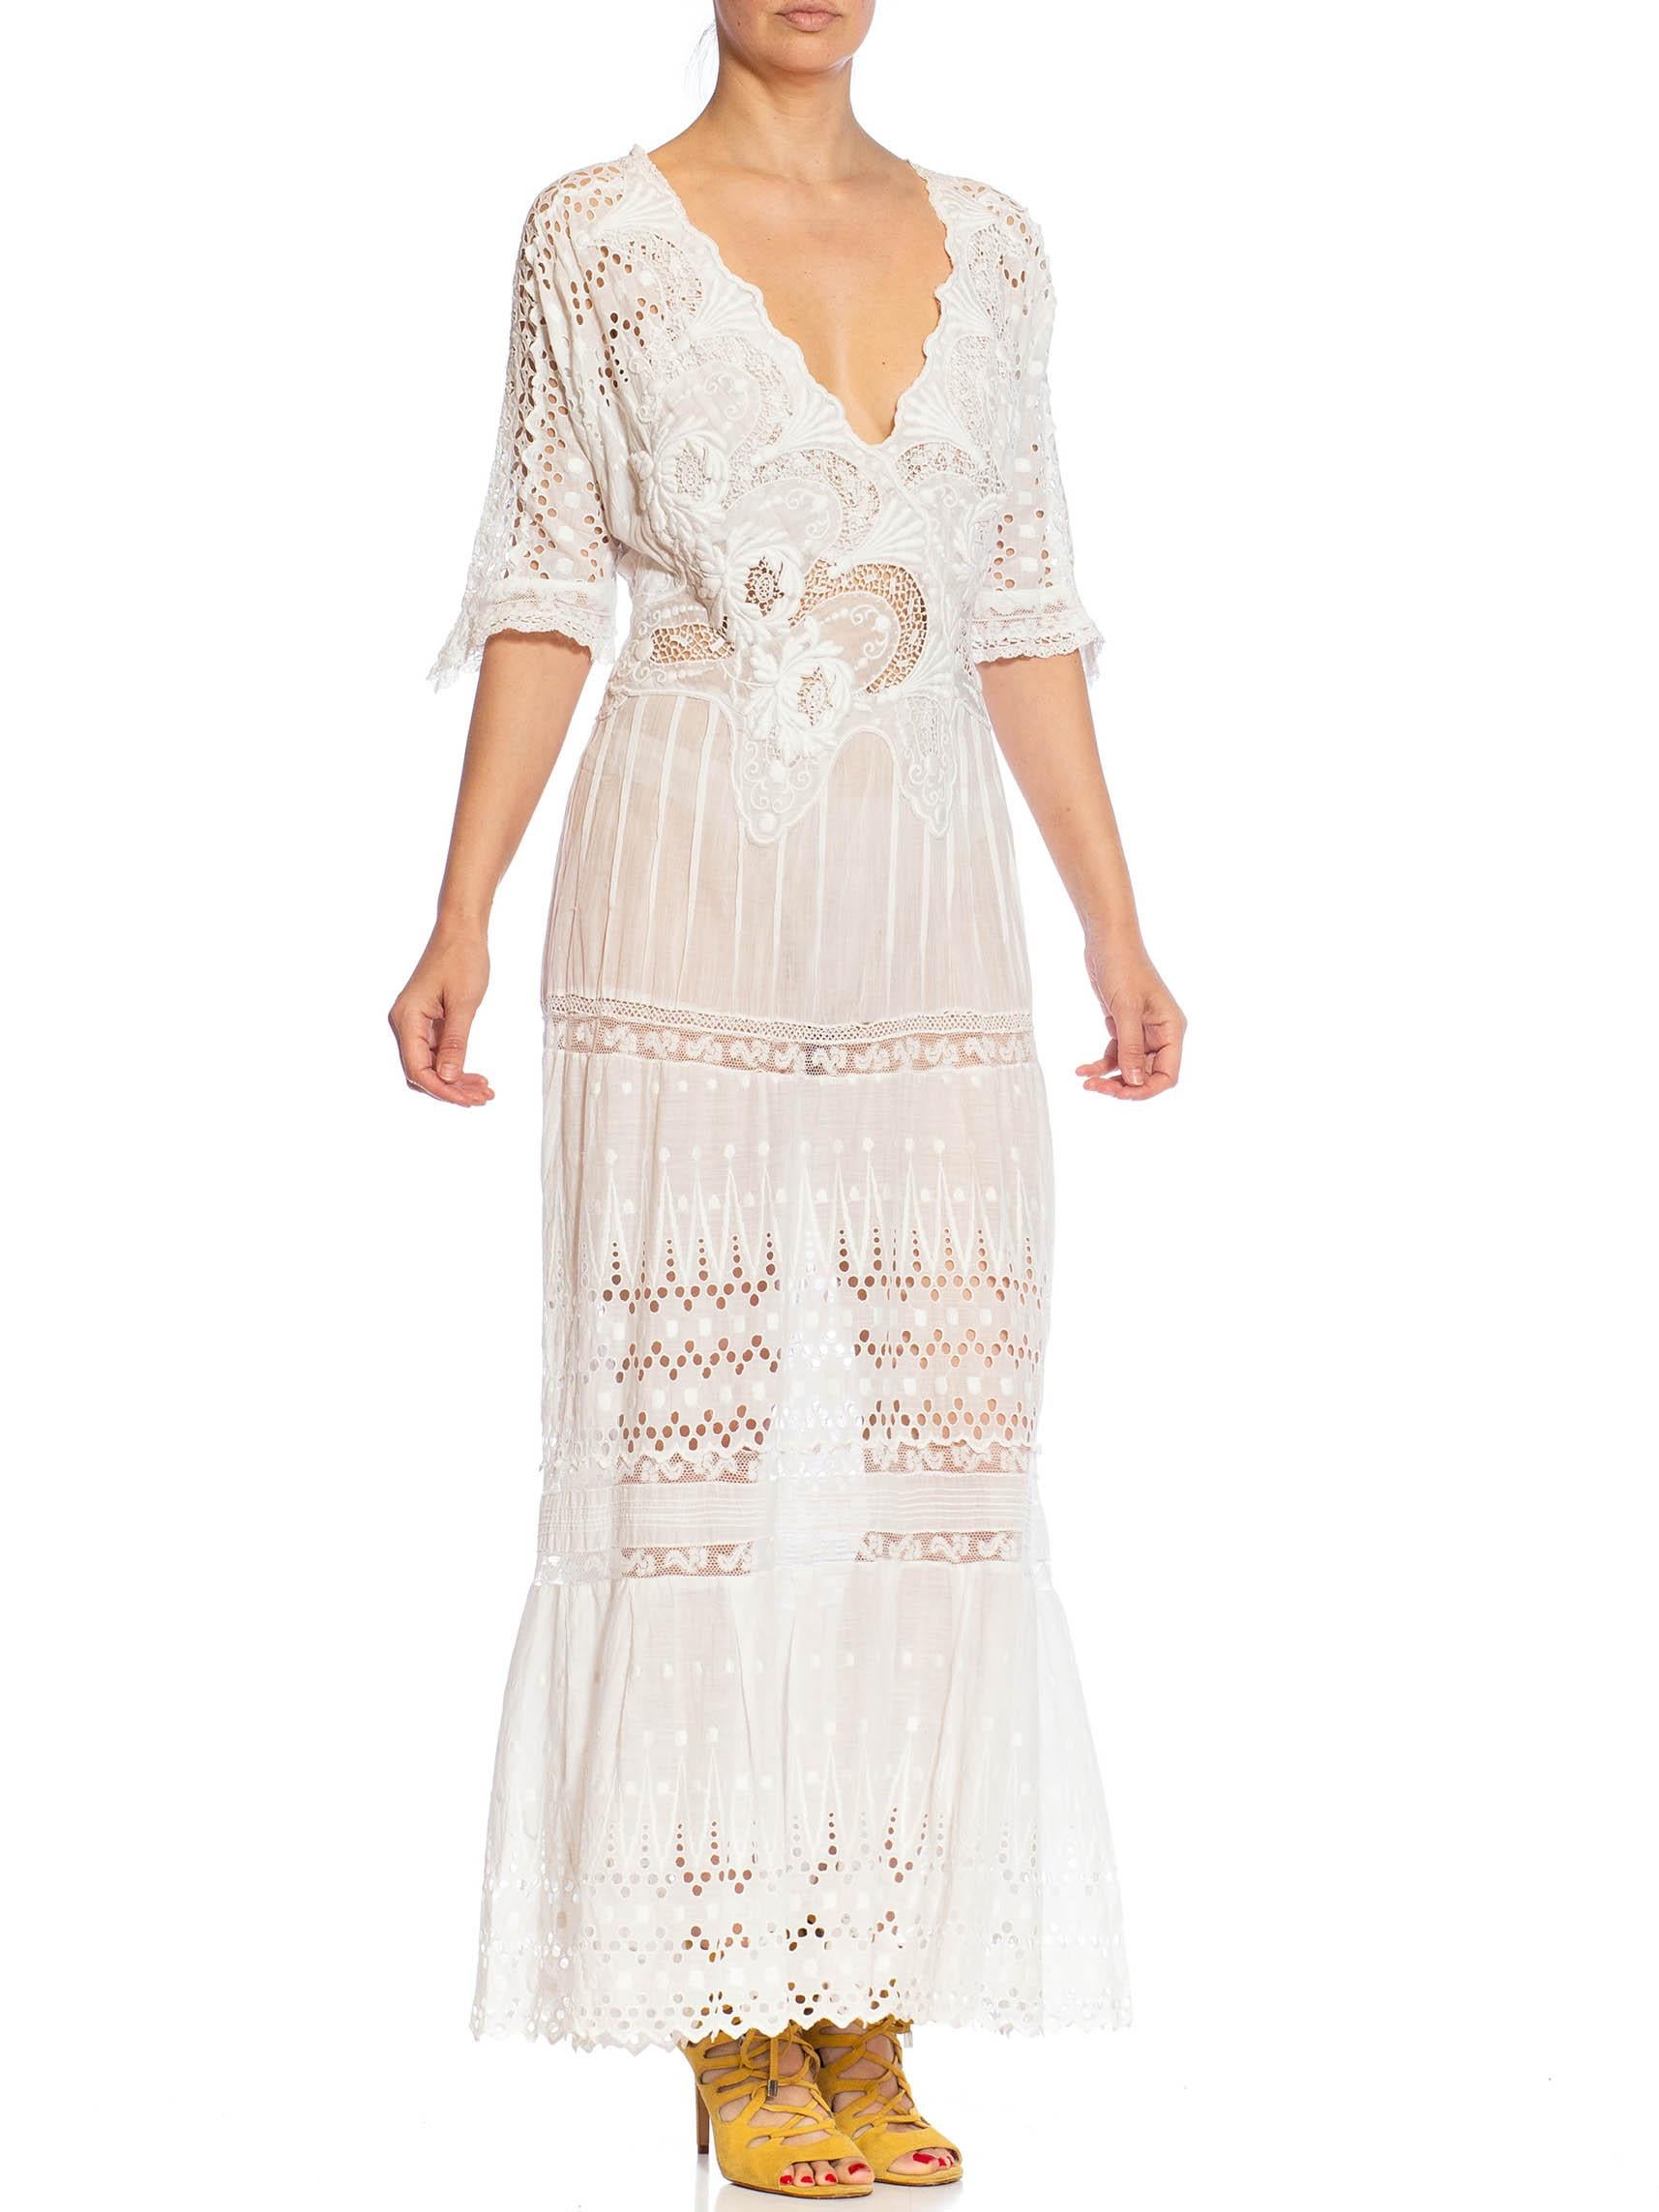 MORPHEW ATELIER White Organic Cotton Antique Lace Dress In Excellent Condition For Sale In New York, NY